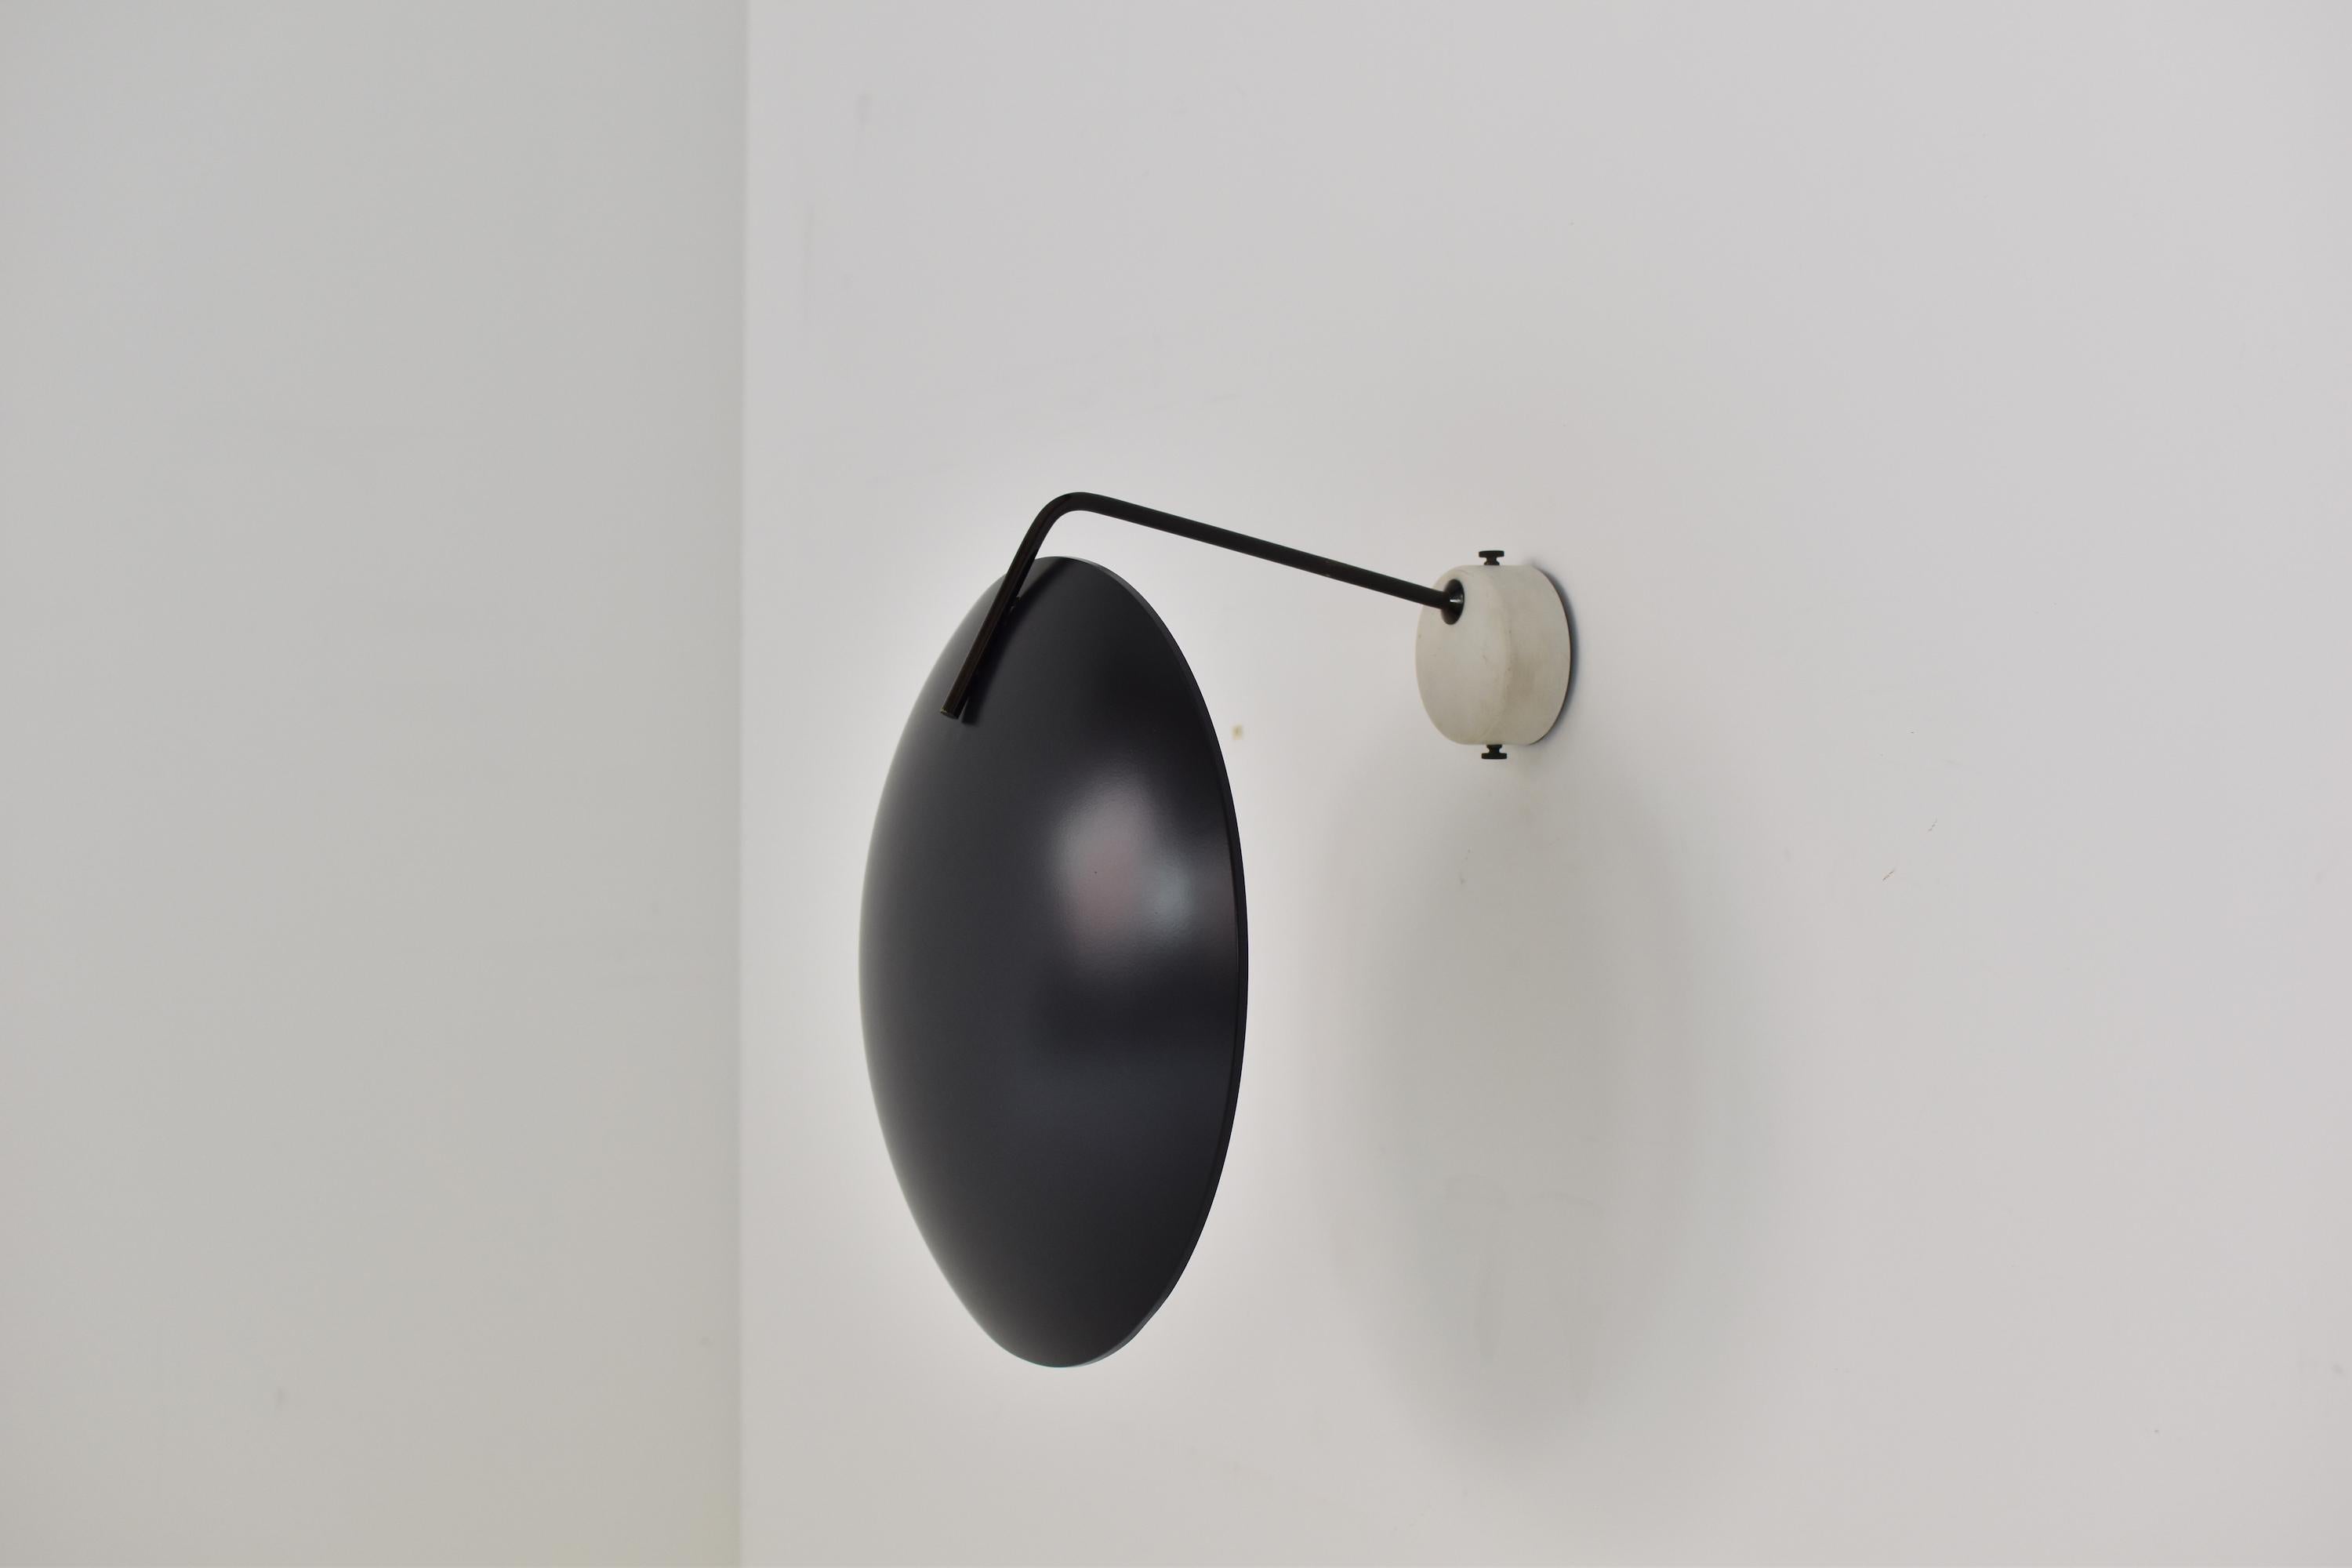 Wall or ceiling pendel by Bruno Gatta for Stillovo, Italy 1954. This is Model No. 232 and features a black lacquered shade hold by a black stem and off white bracket. Professionaly restored. Italian classic.